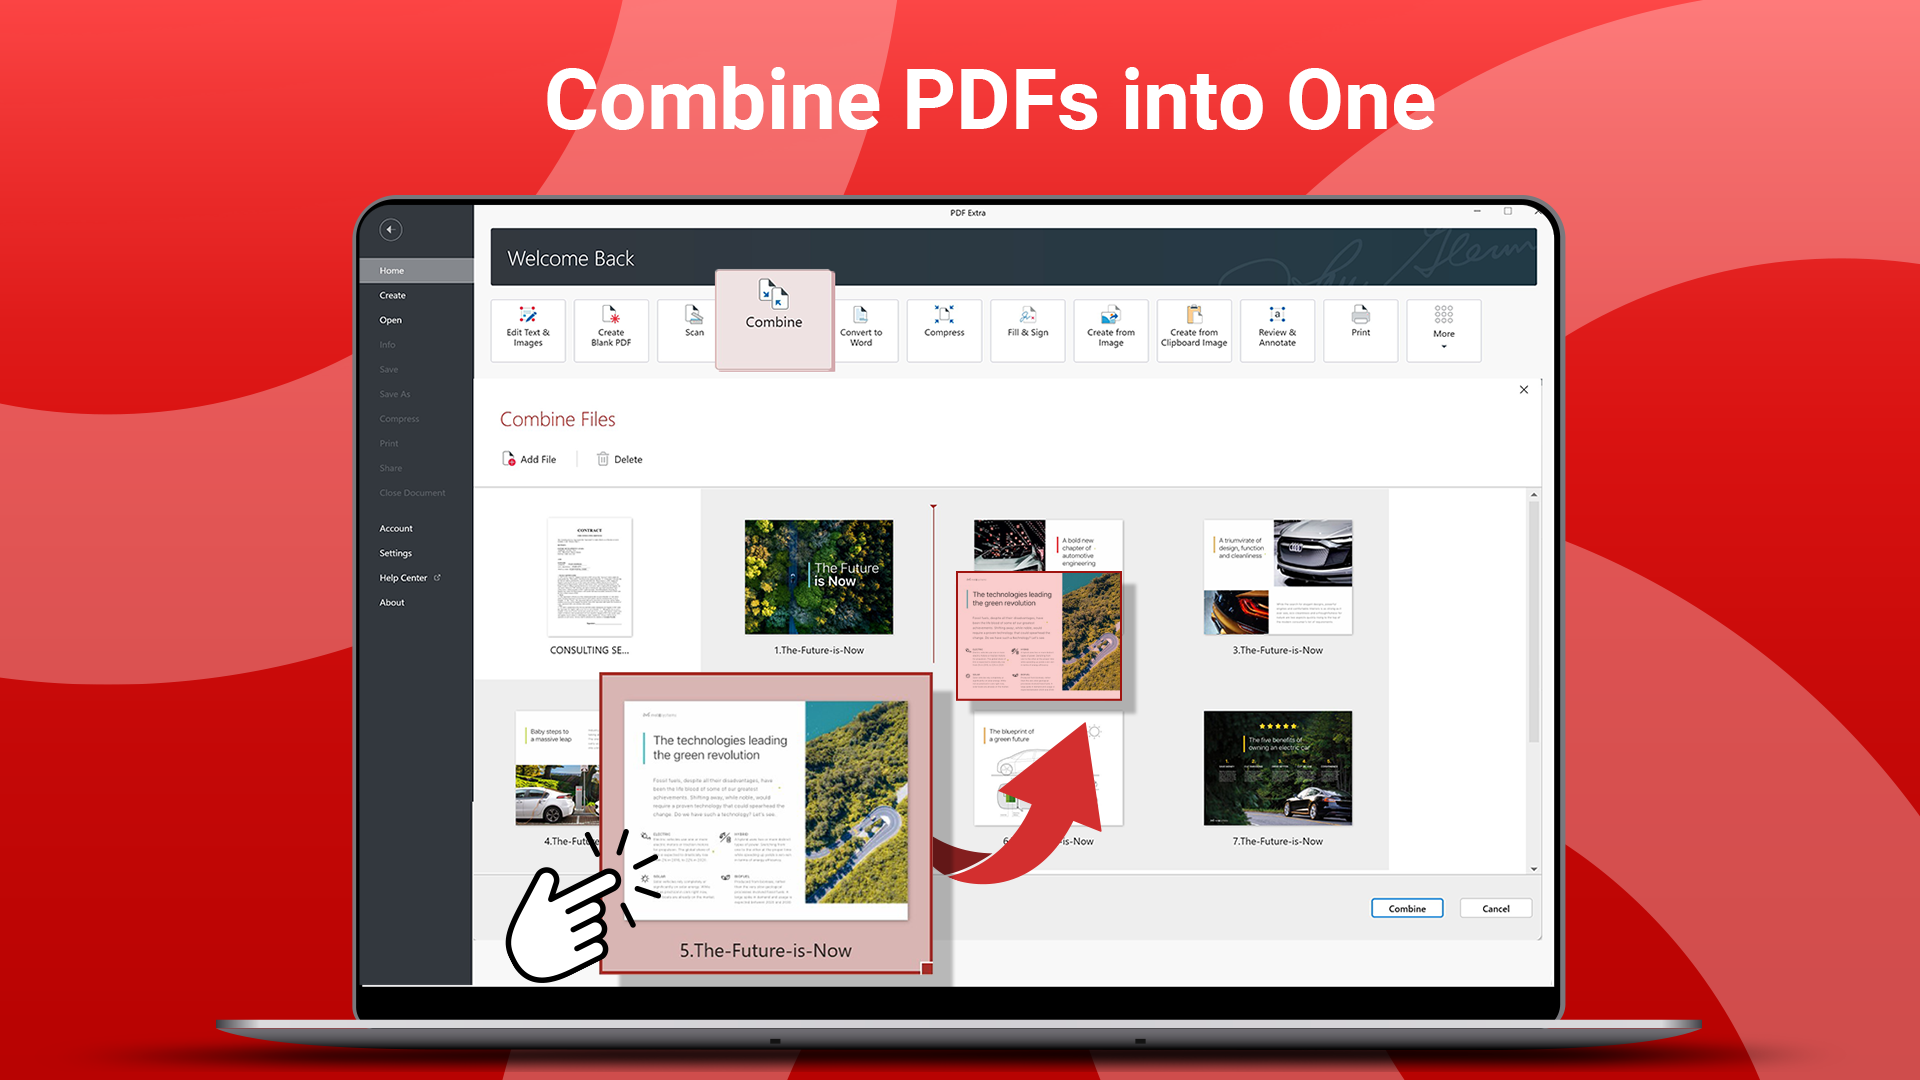 Combine PDFs into One